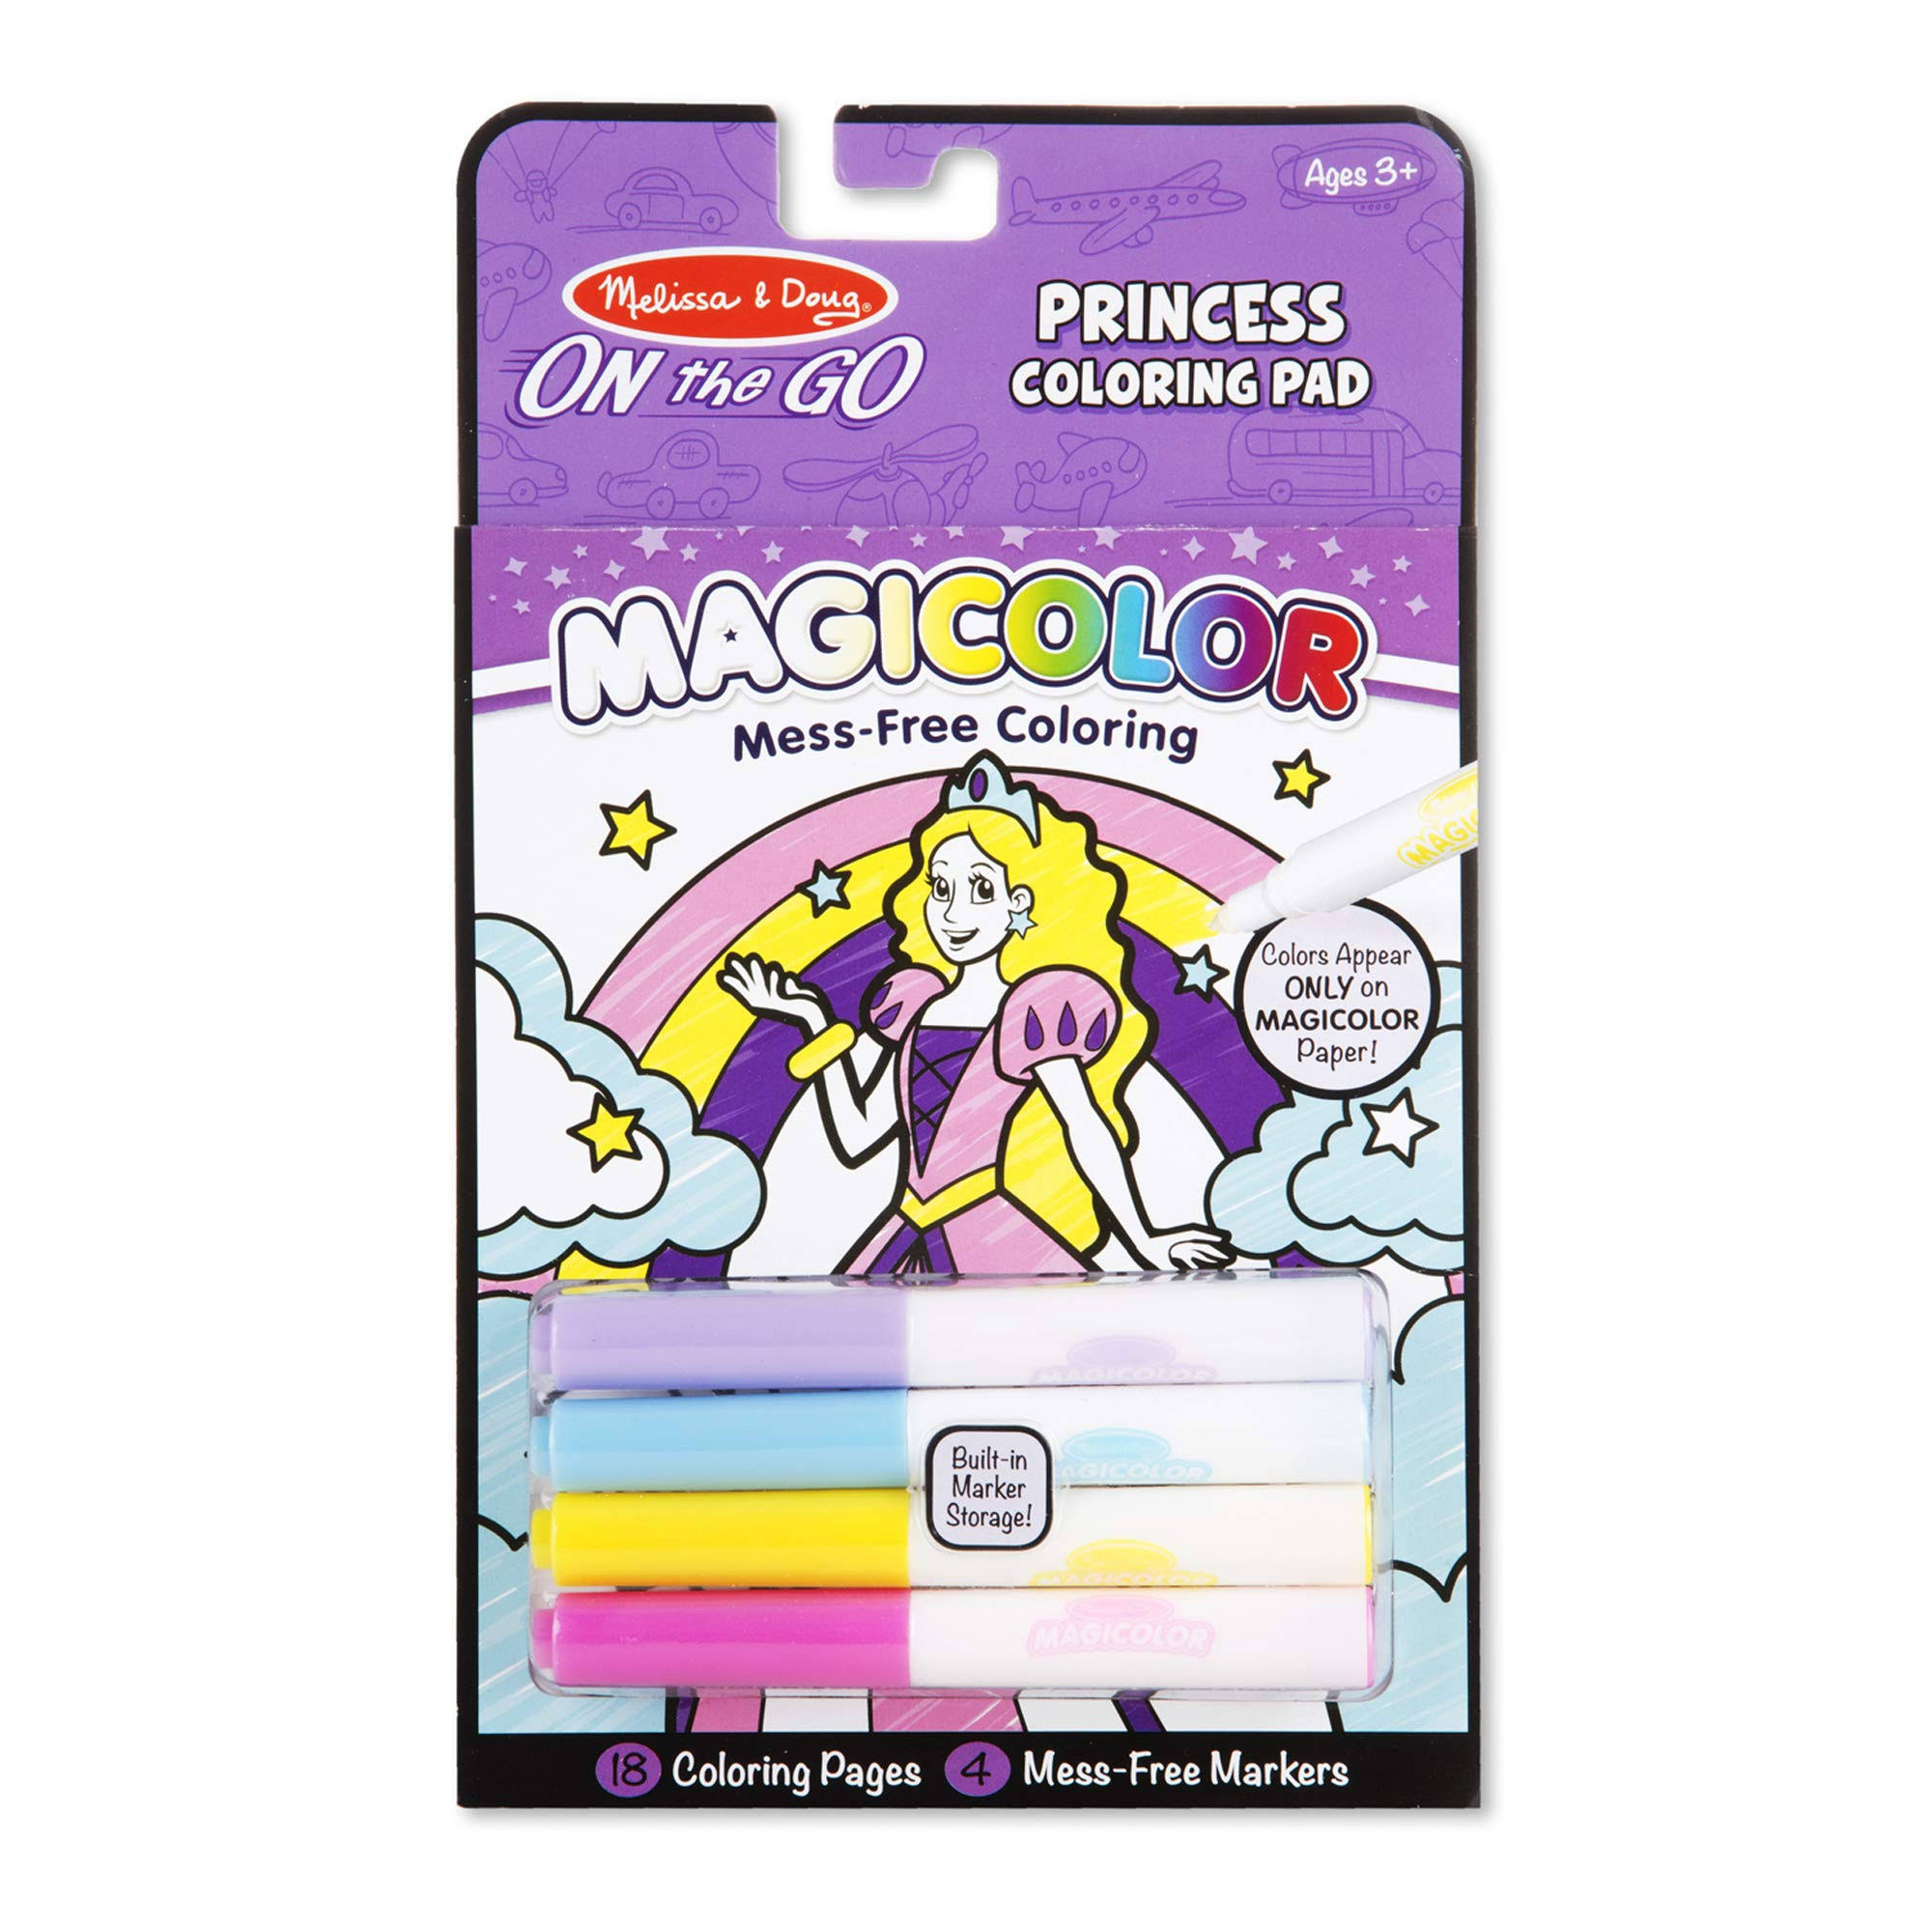 Melissa & Doug On the Go Magicolor Princess Coloring Pad - 18 Coloring Pages